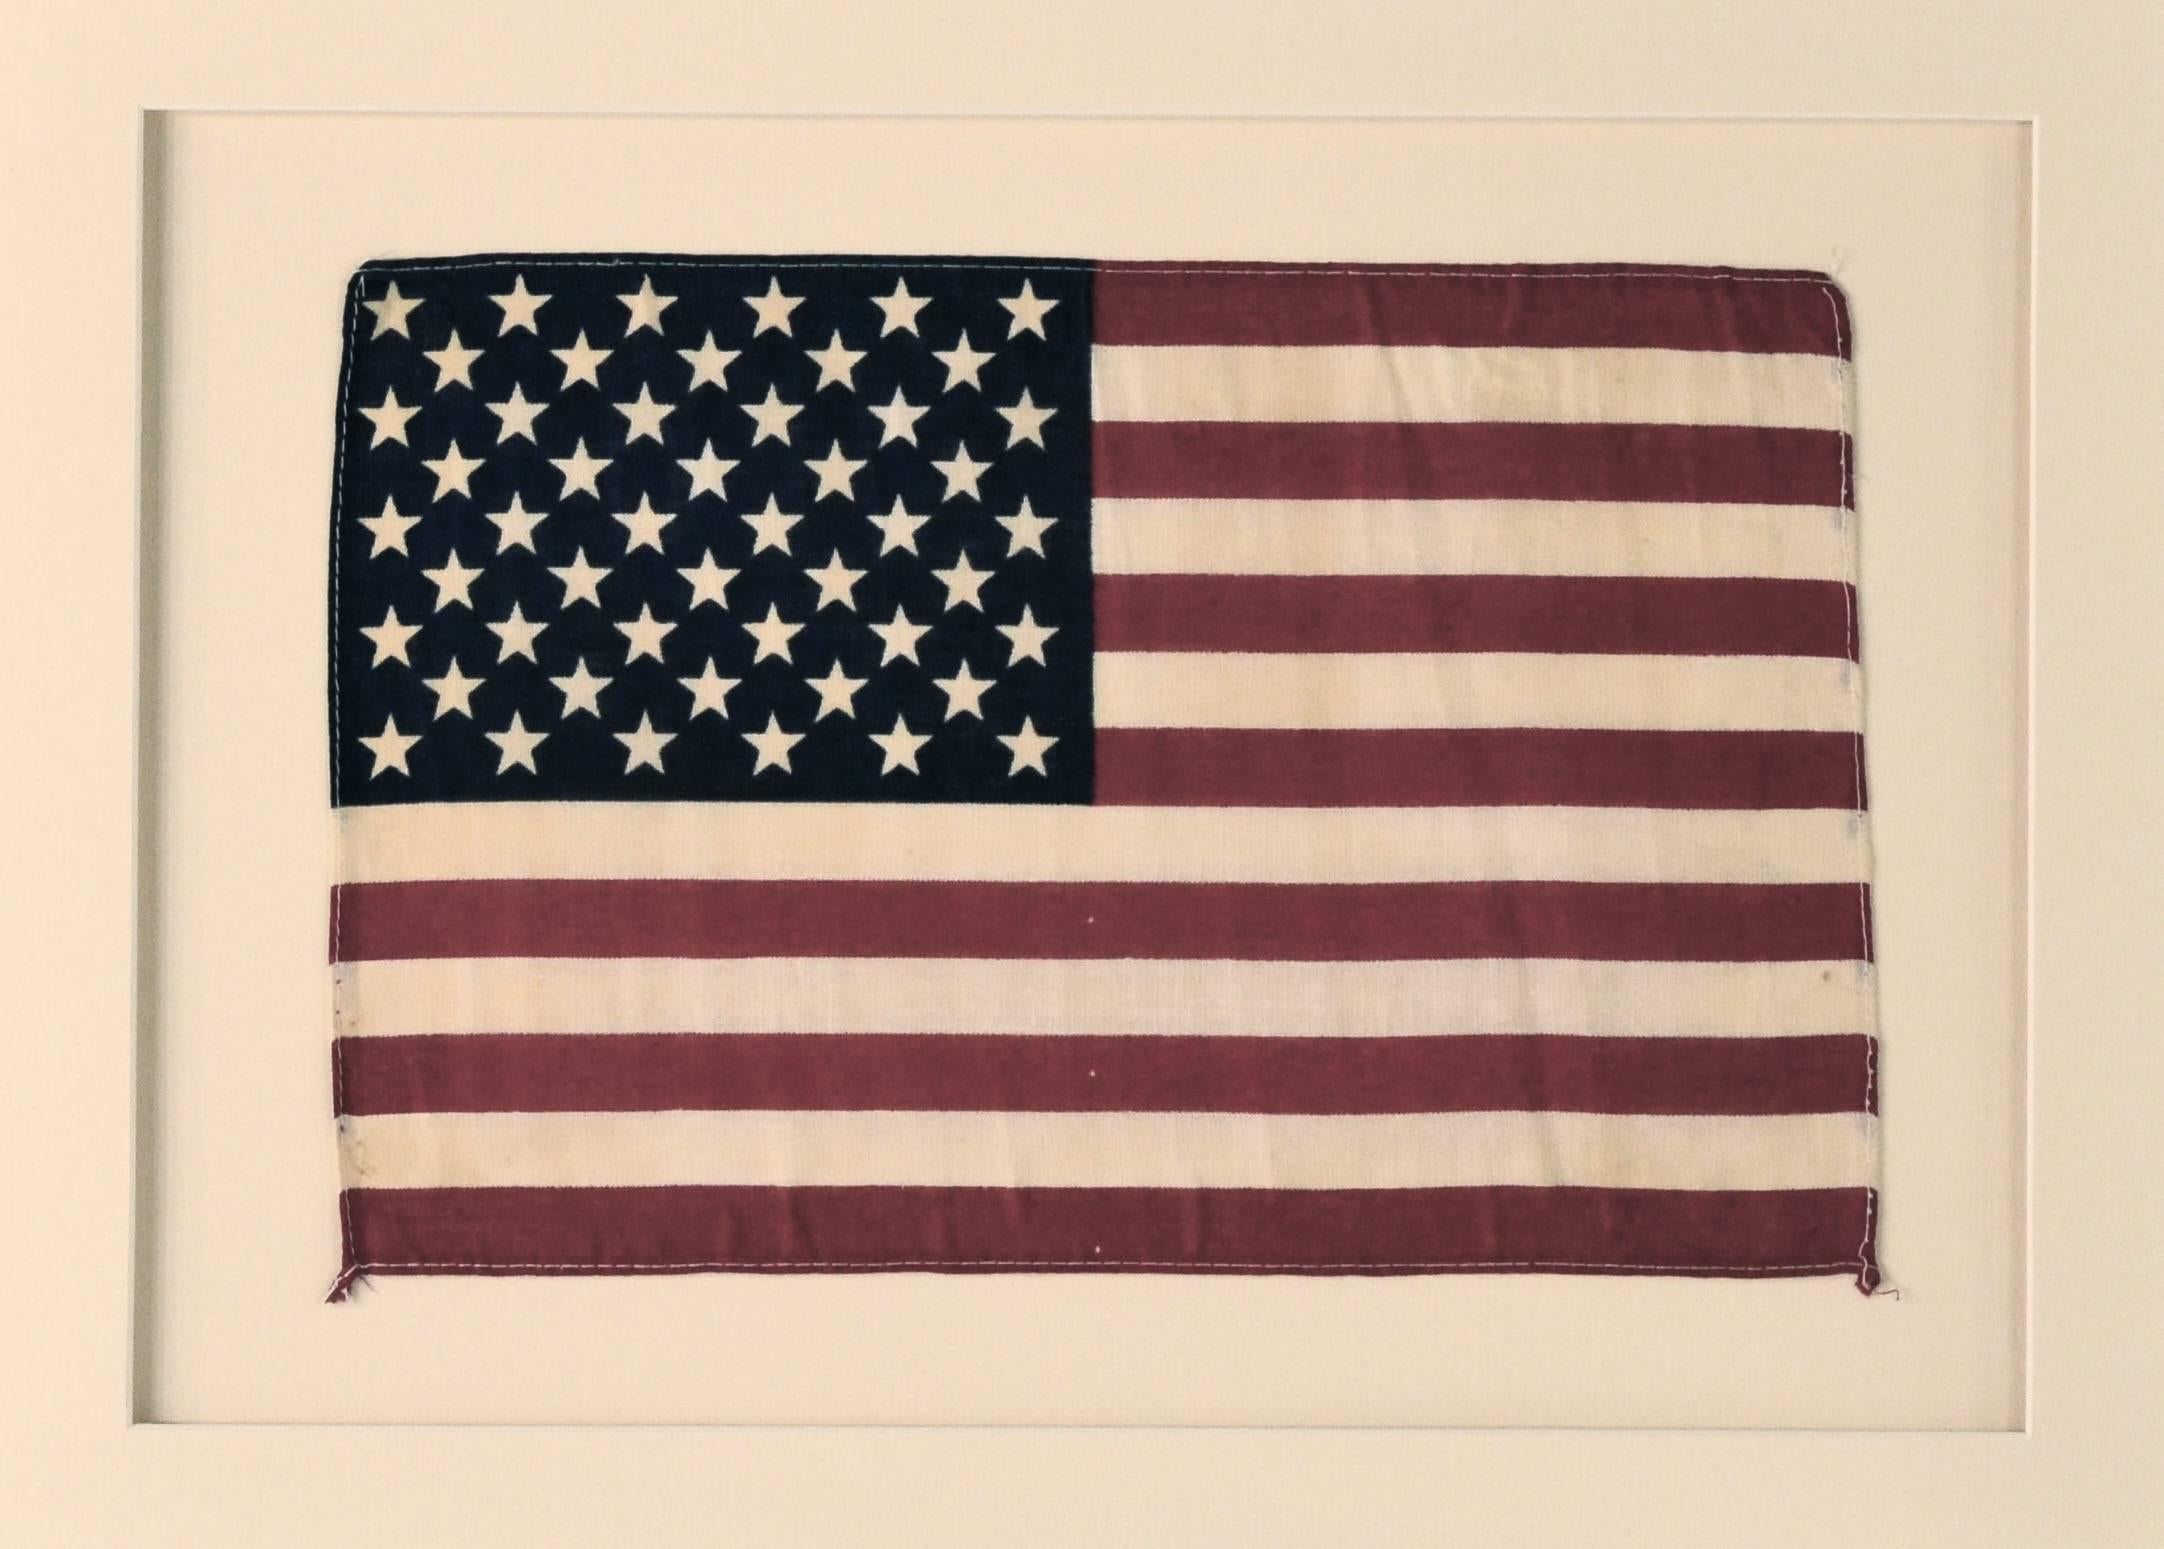 Vintage 50 star flag made of printed cotton. This flag was saved when the 50 star flag first appeared in 1959.
Conservation framing with UV acrylic.
                                     